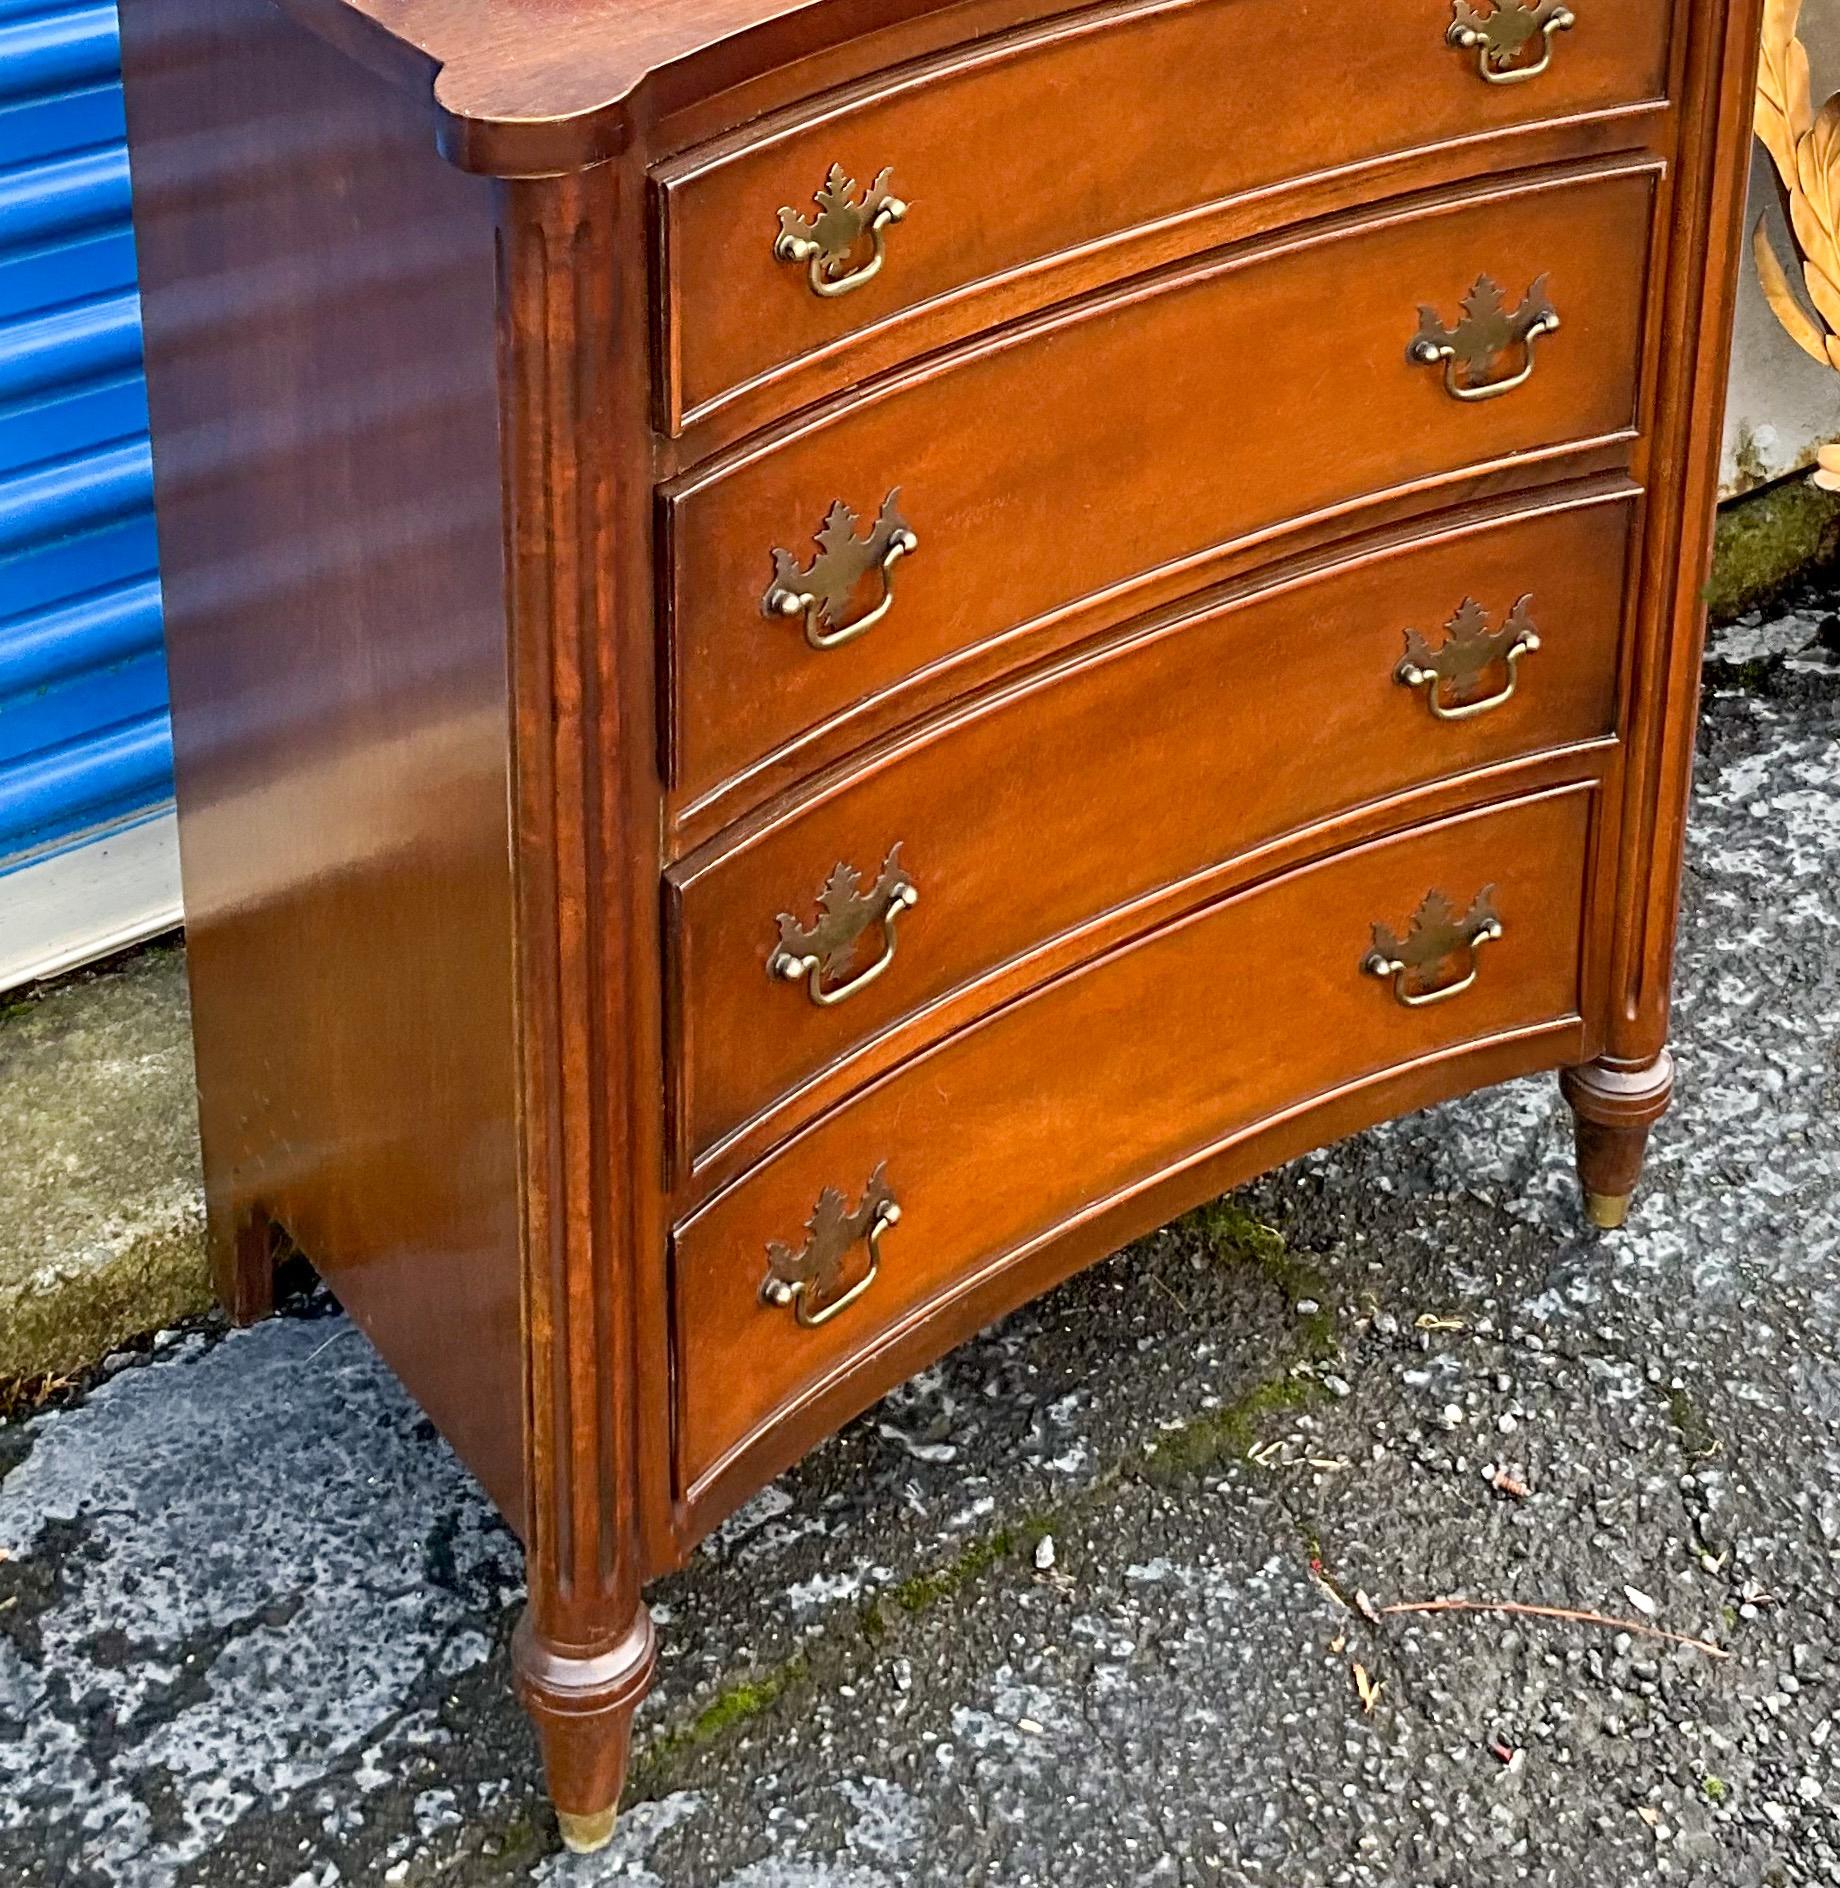 This is a pair of diminutive Chinese Chippendale style chests with concave fronts and brass capped feet. They were bench made pieces by a Pennsylvania company called Schell. The chests would work from bedside to side table and pack a punch for their